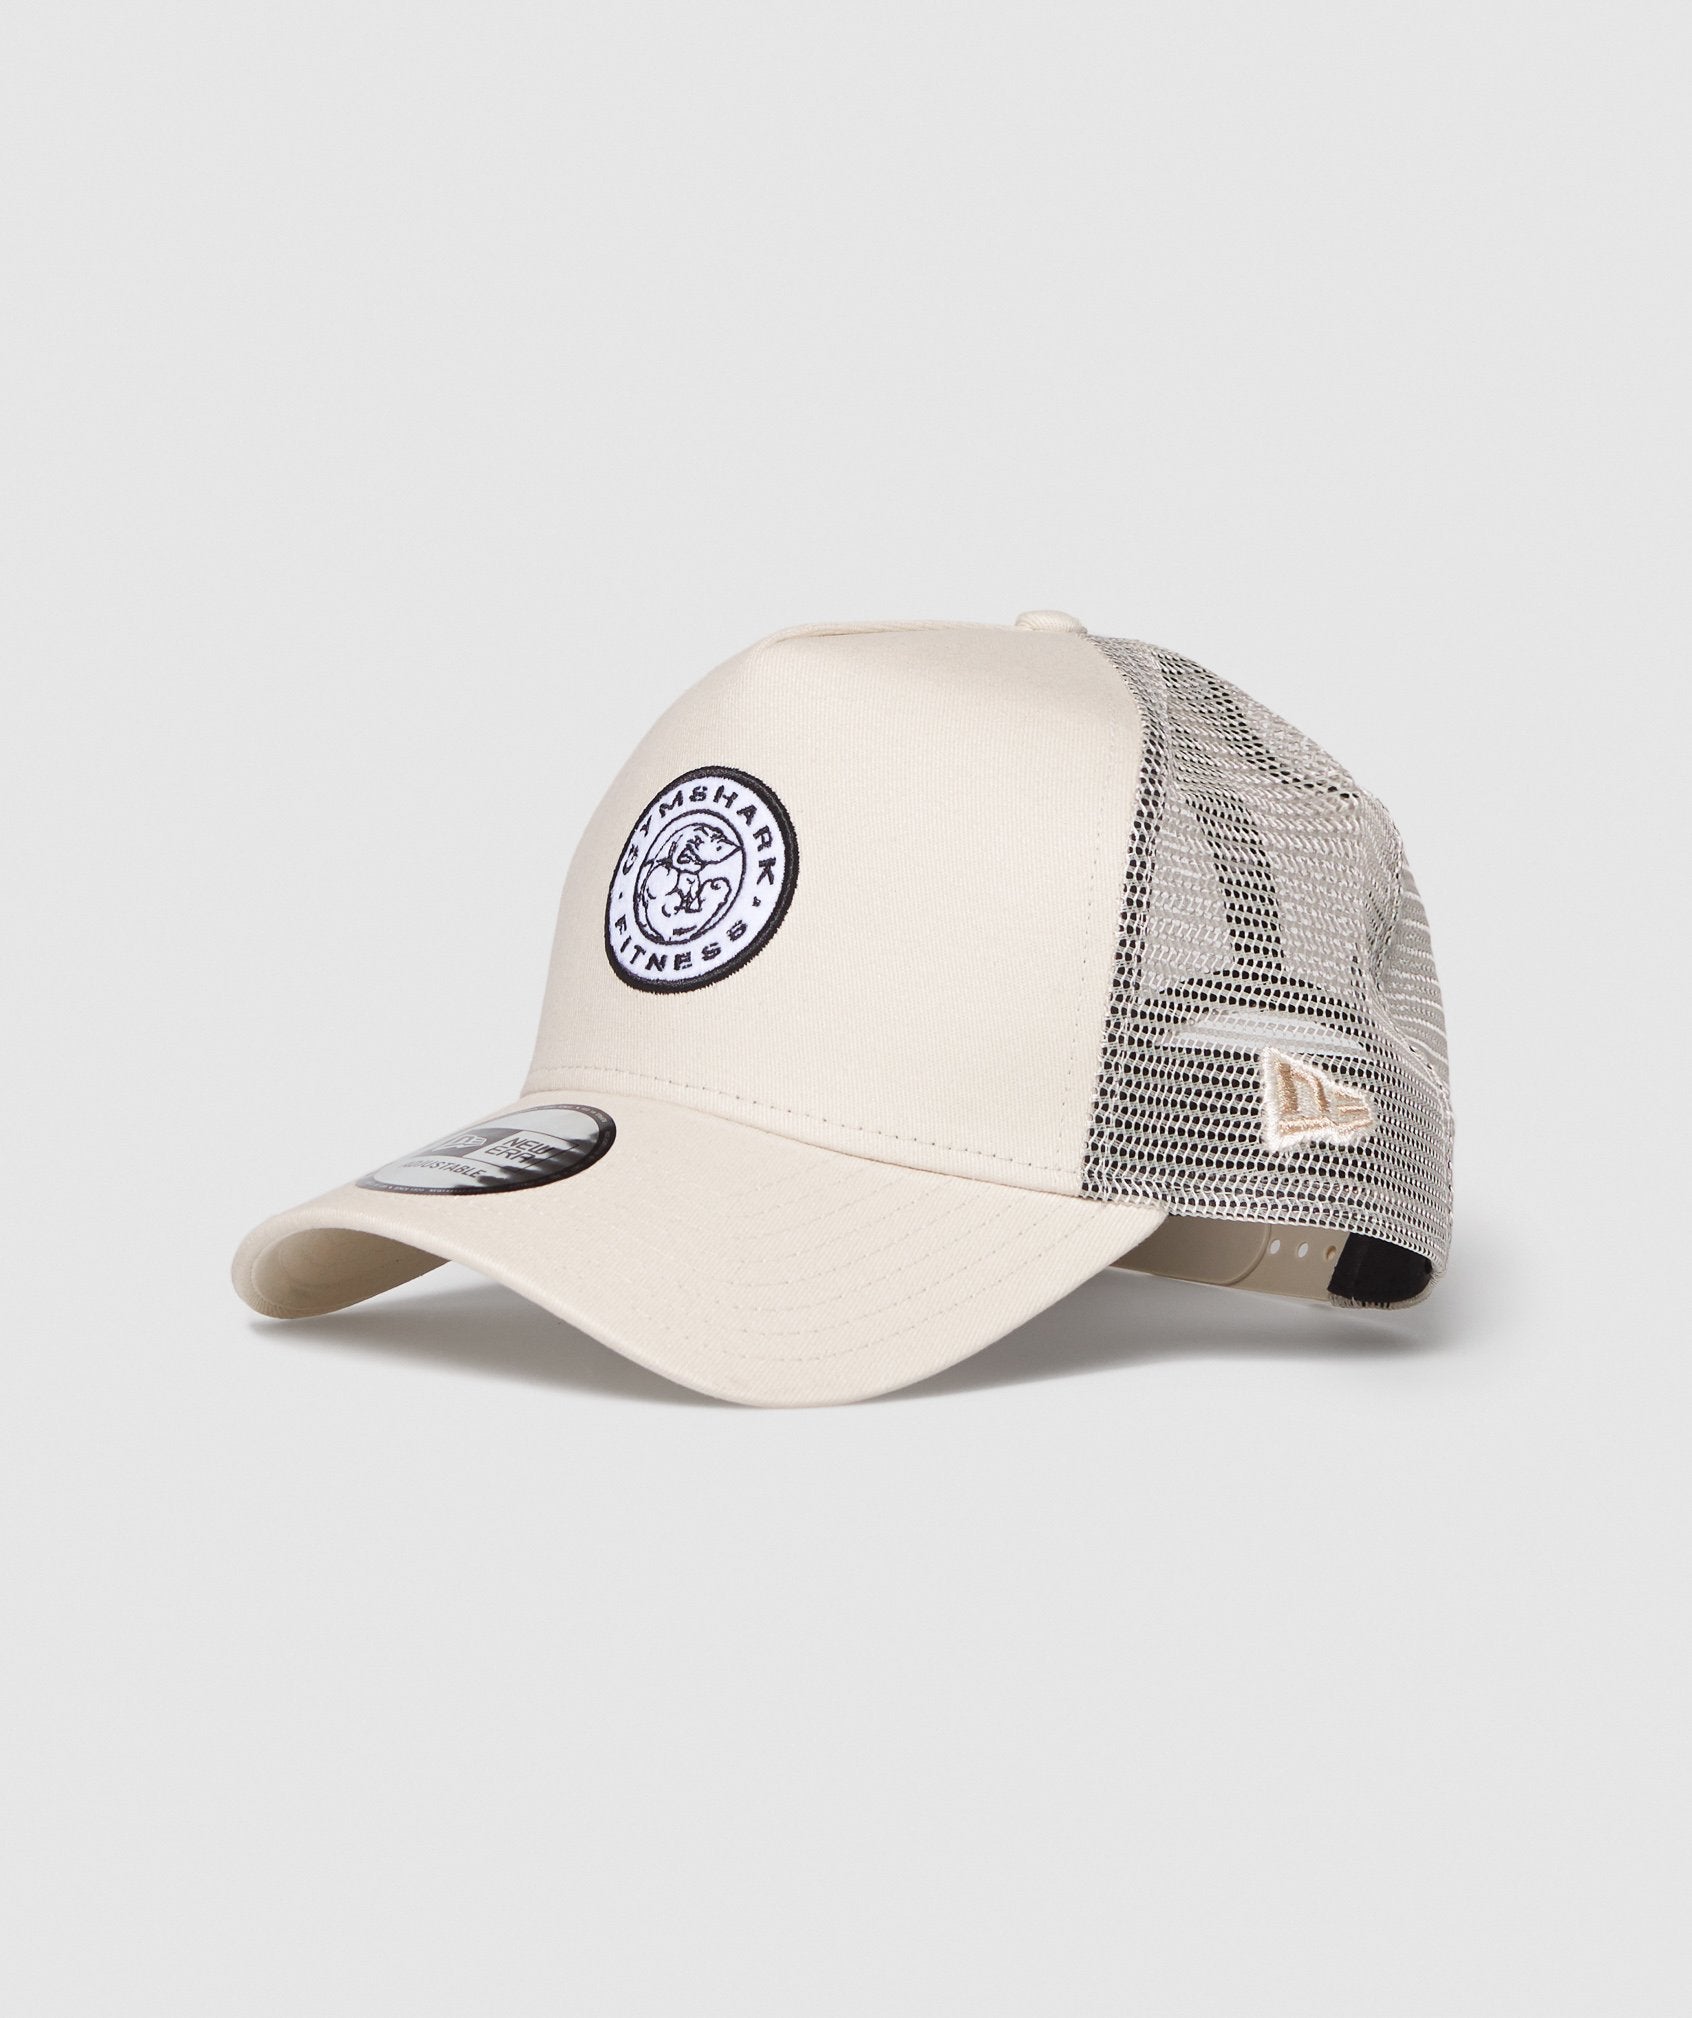 New Era GS Legacy Trucker in Sand - view 2